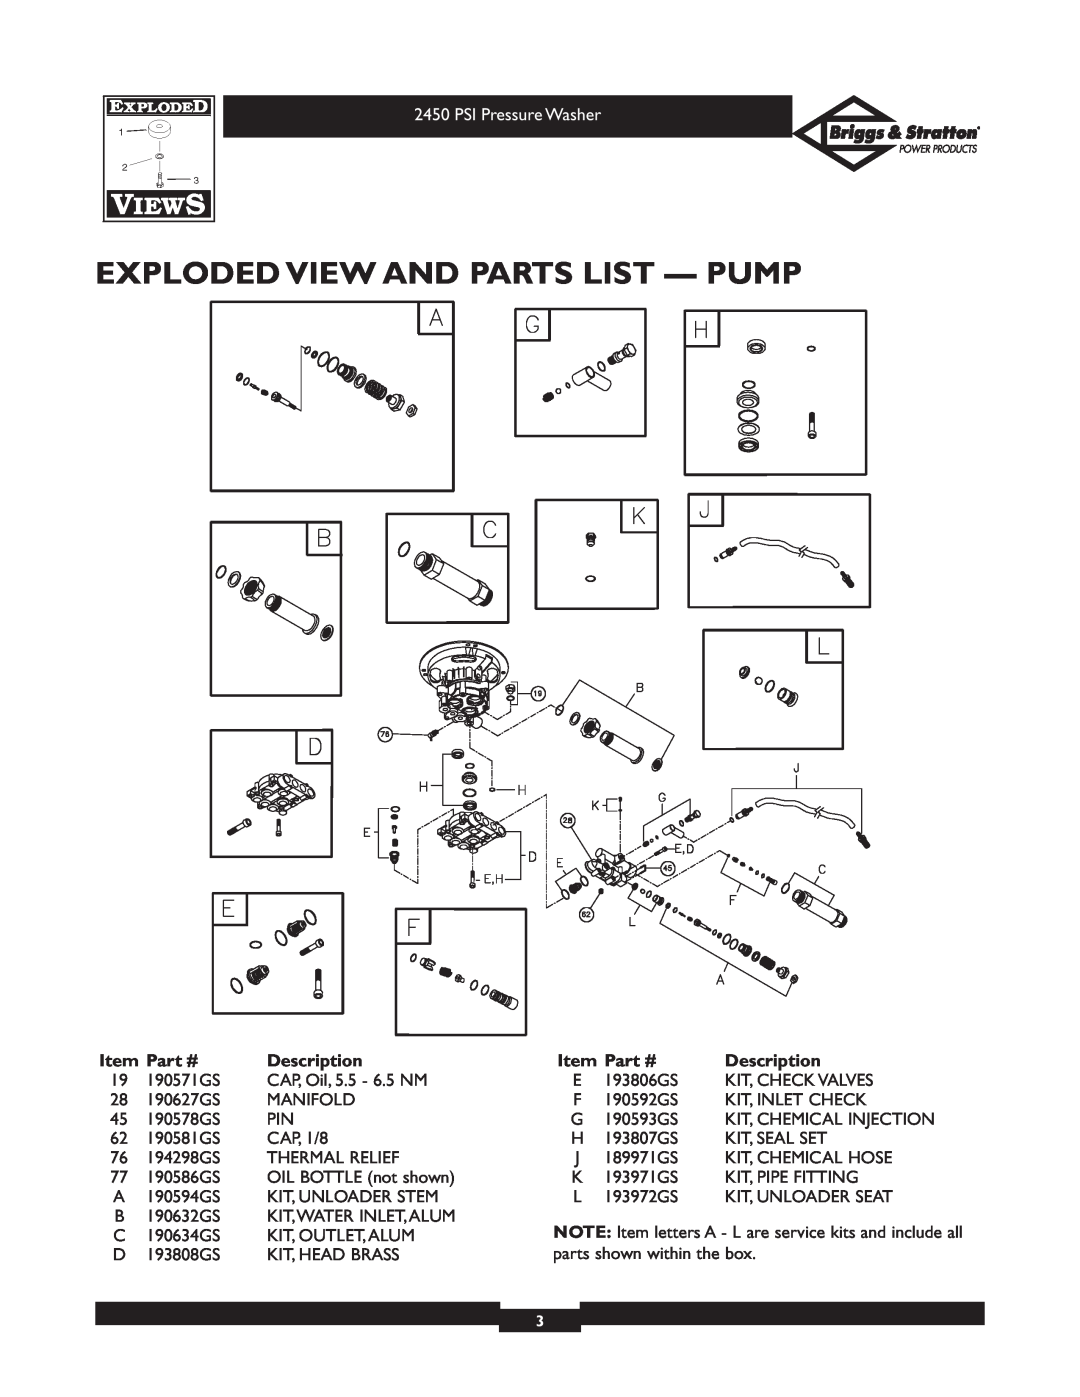 Briggs & Stratton 020215 manual Exploded View And Parts List - Pump, PSI Pressure Washer 